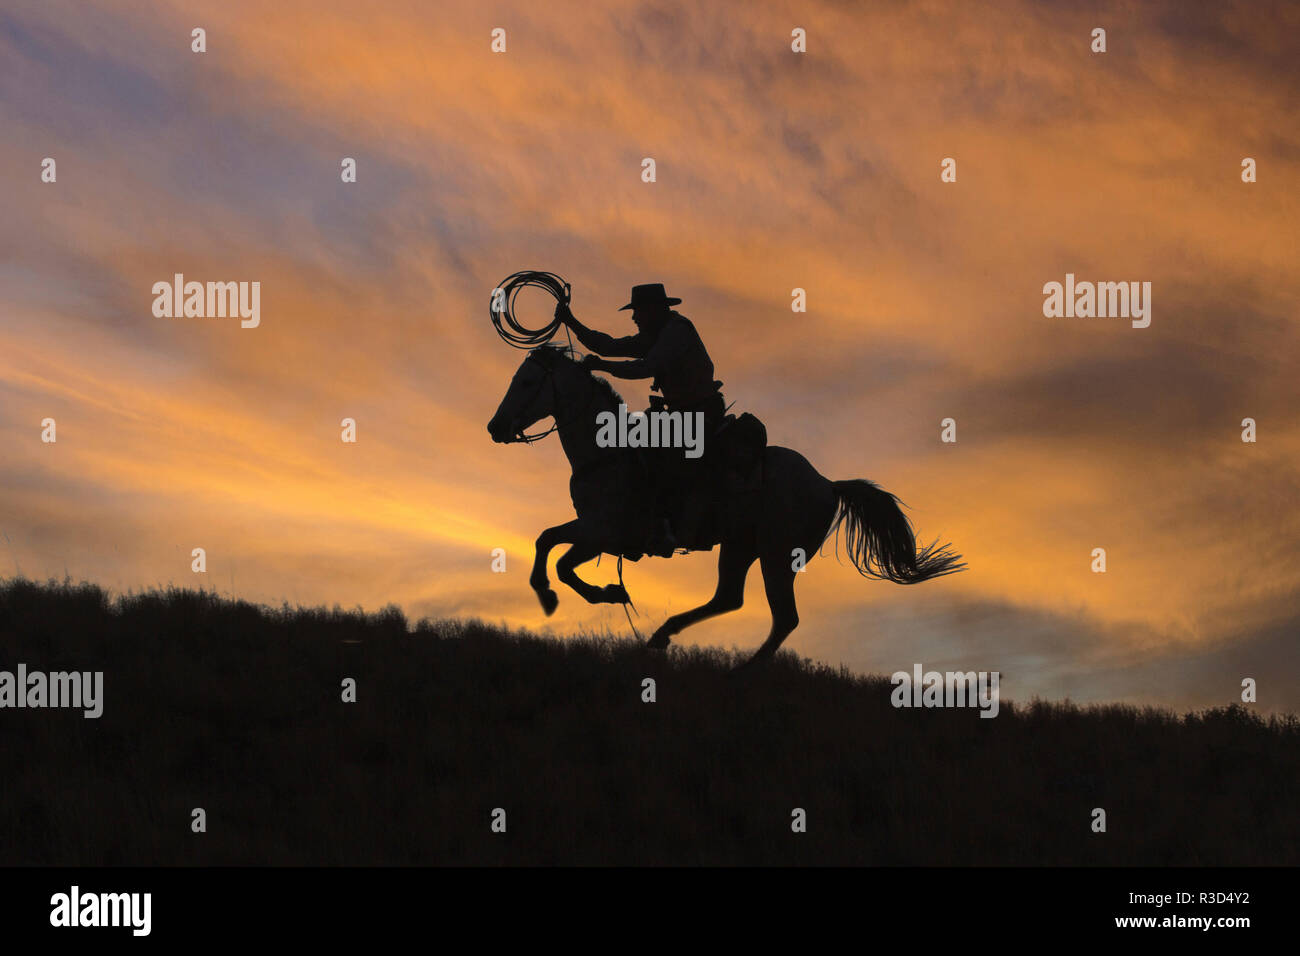 Usa, Wyoming, Shell, The Hideout Ranch, Cowboy and Lasso Silhouette at Sunset (MR, PR) Stock Photo